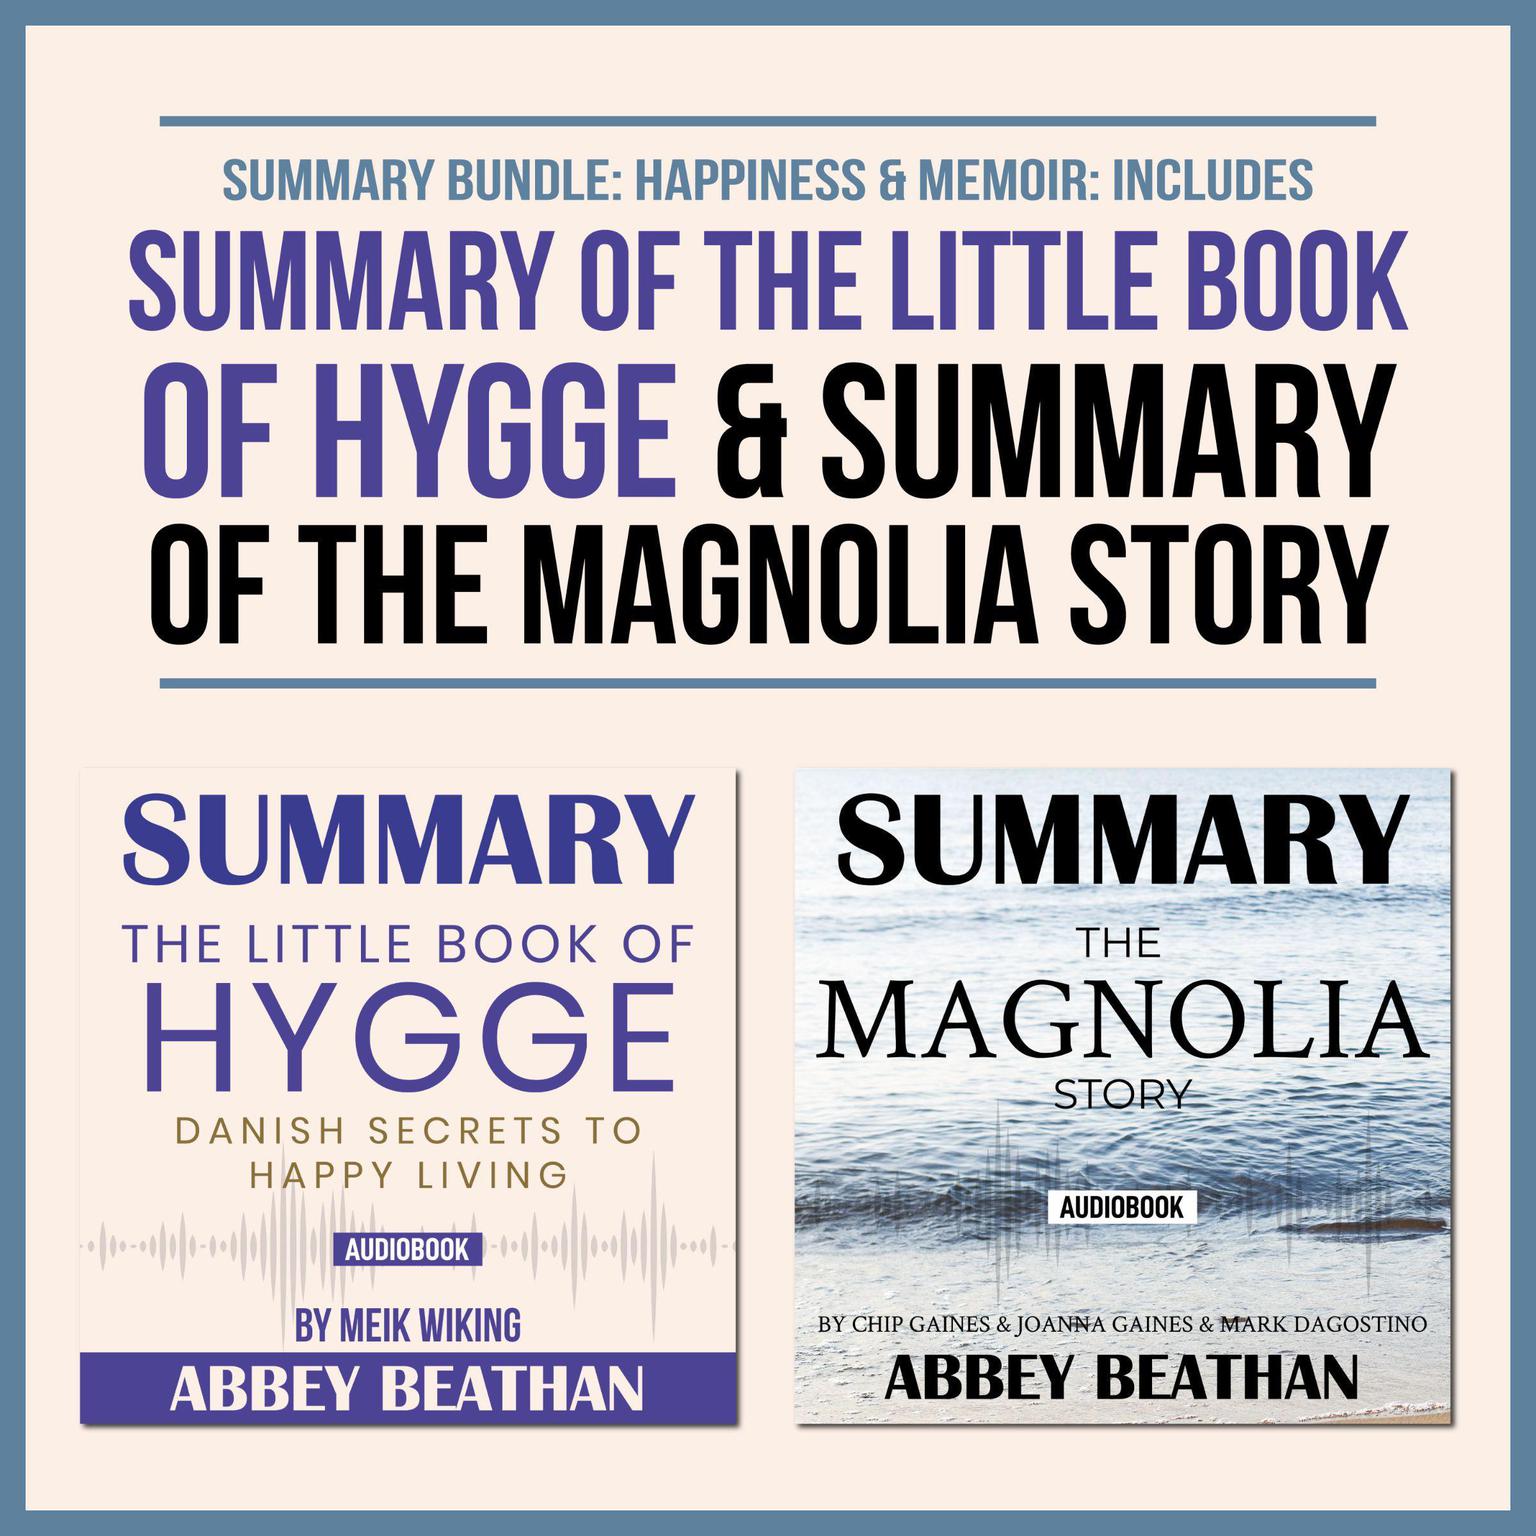 Summary Bundle: Happiness & Memoir: Includes Summary of The Little Book of Hygge & Summary of The Magnolia Story Audiobook, by Abbey Beathan